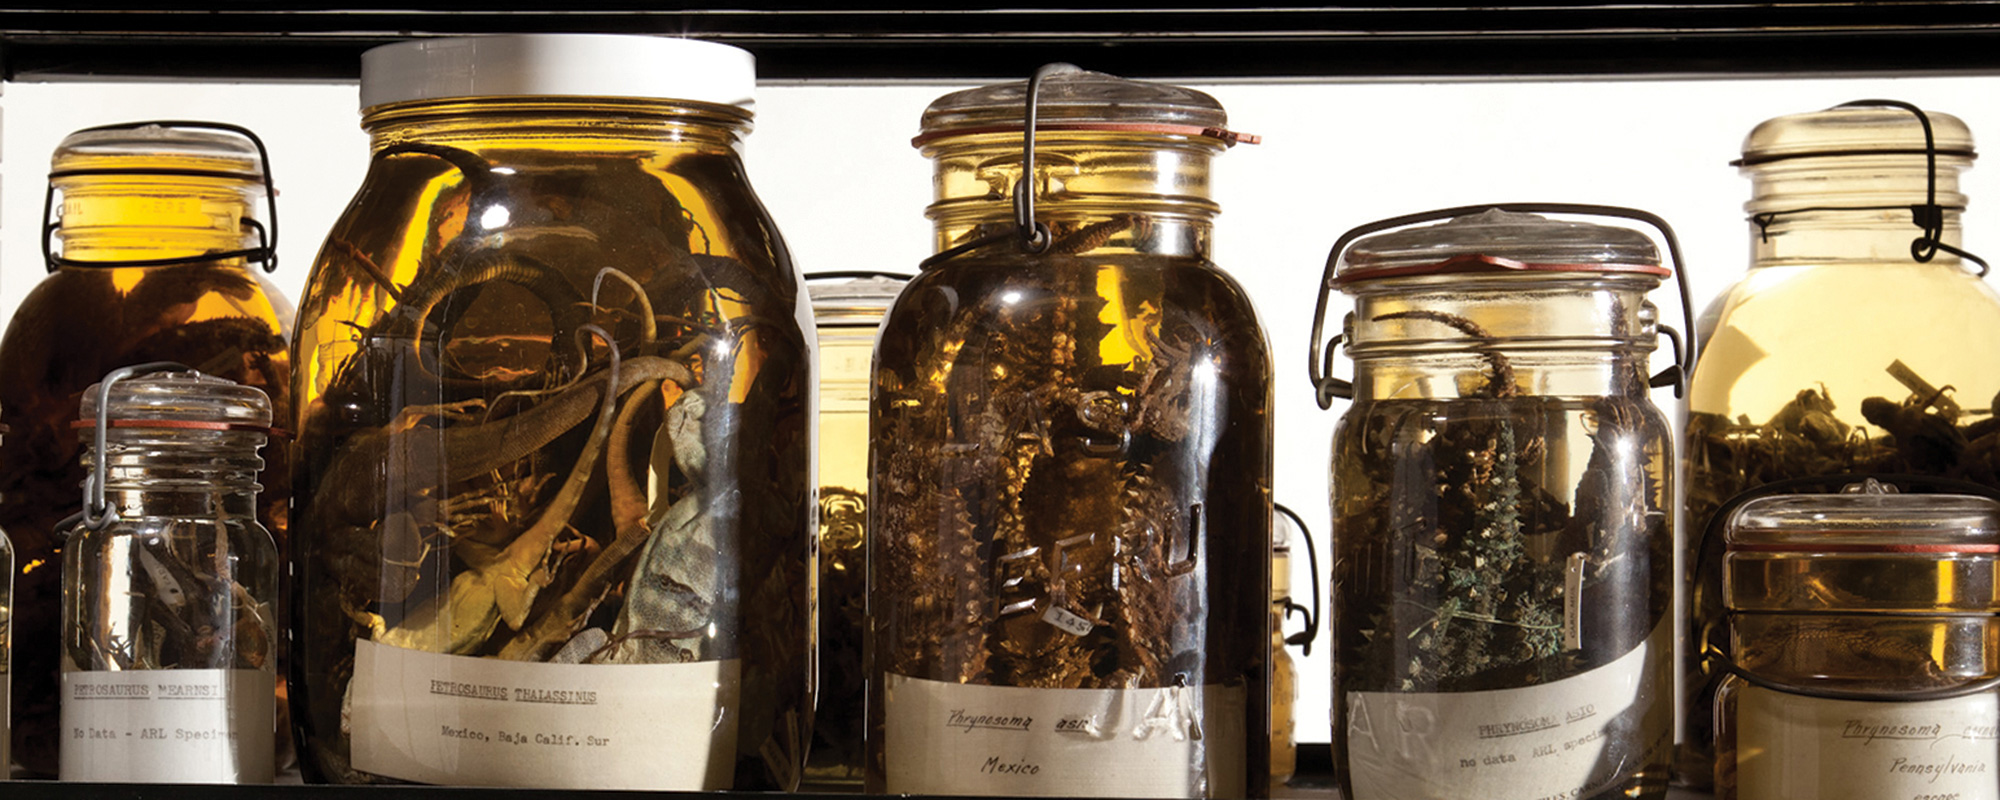 Rows of jars containing specimens of amphibians and reptiles.